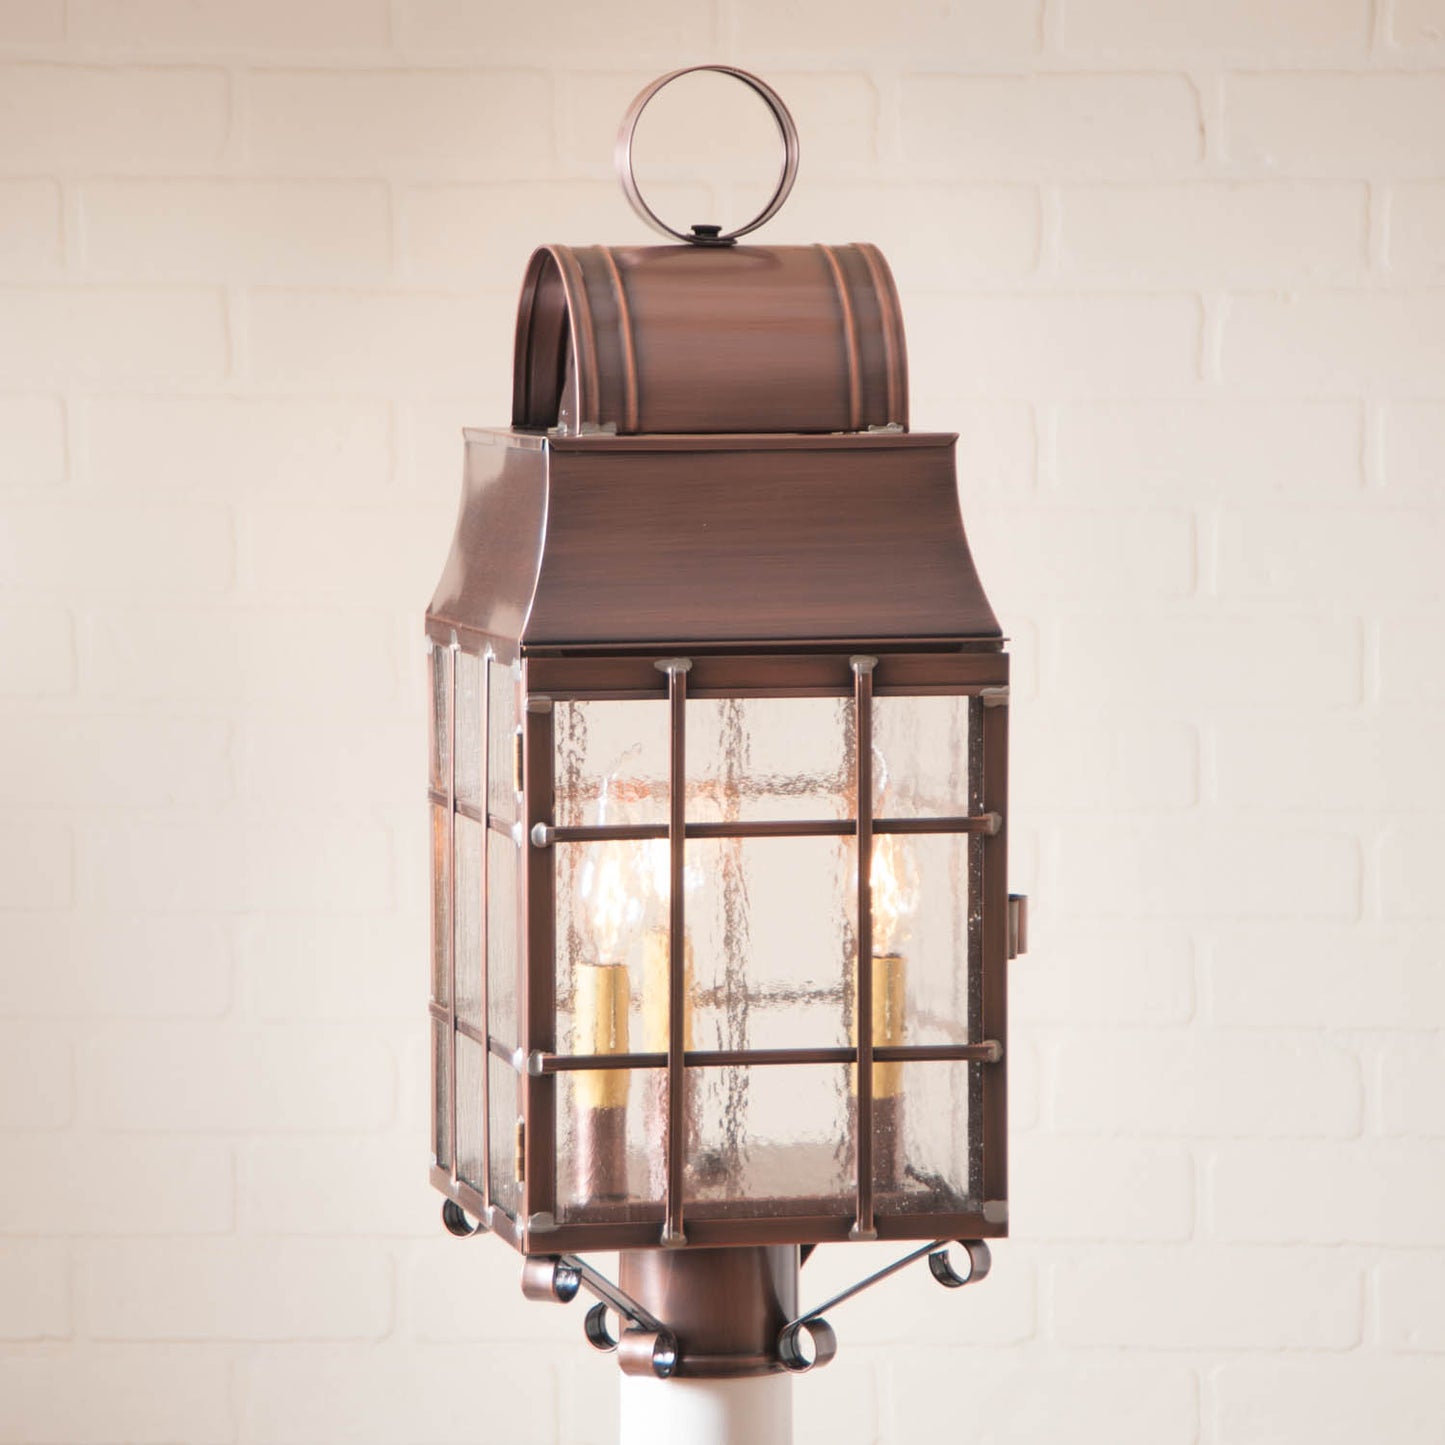 Hand-Crafted | Federal | Post Lantern